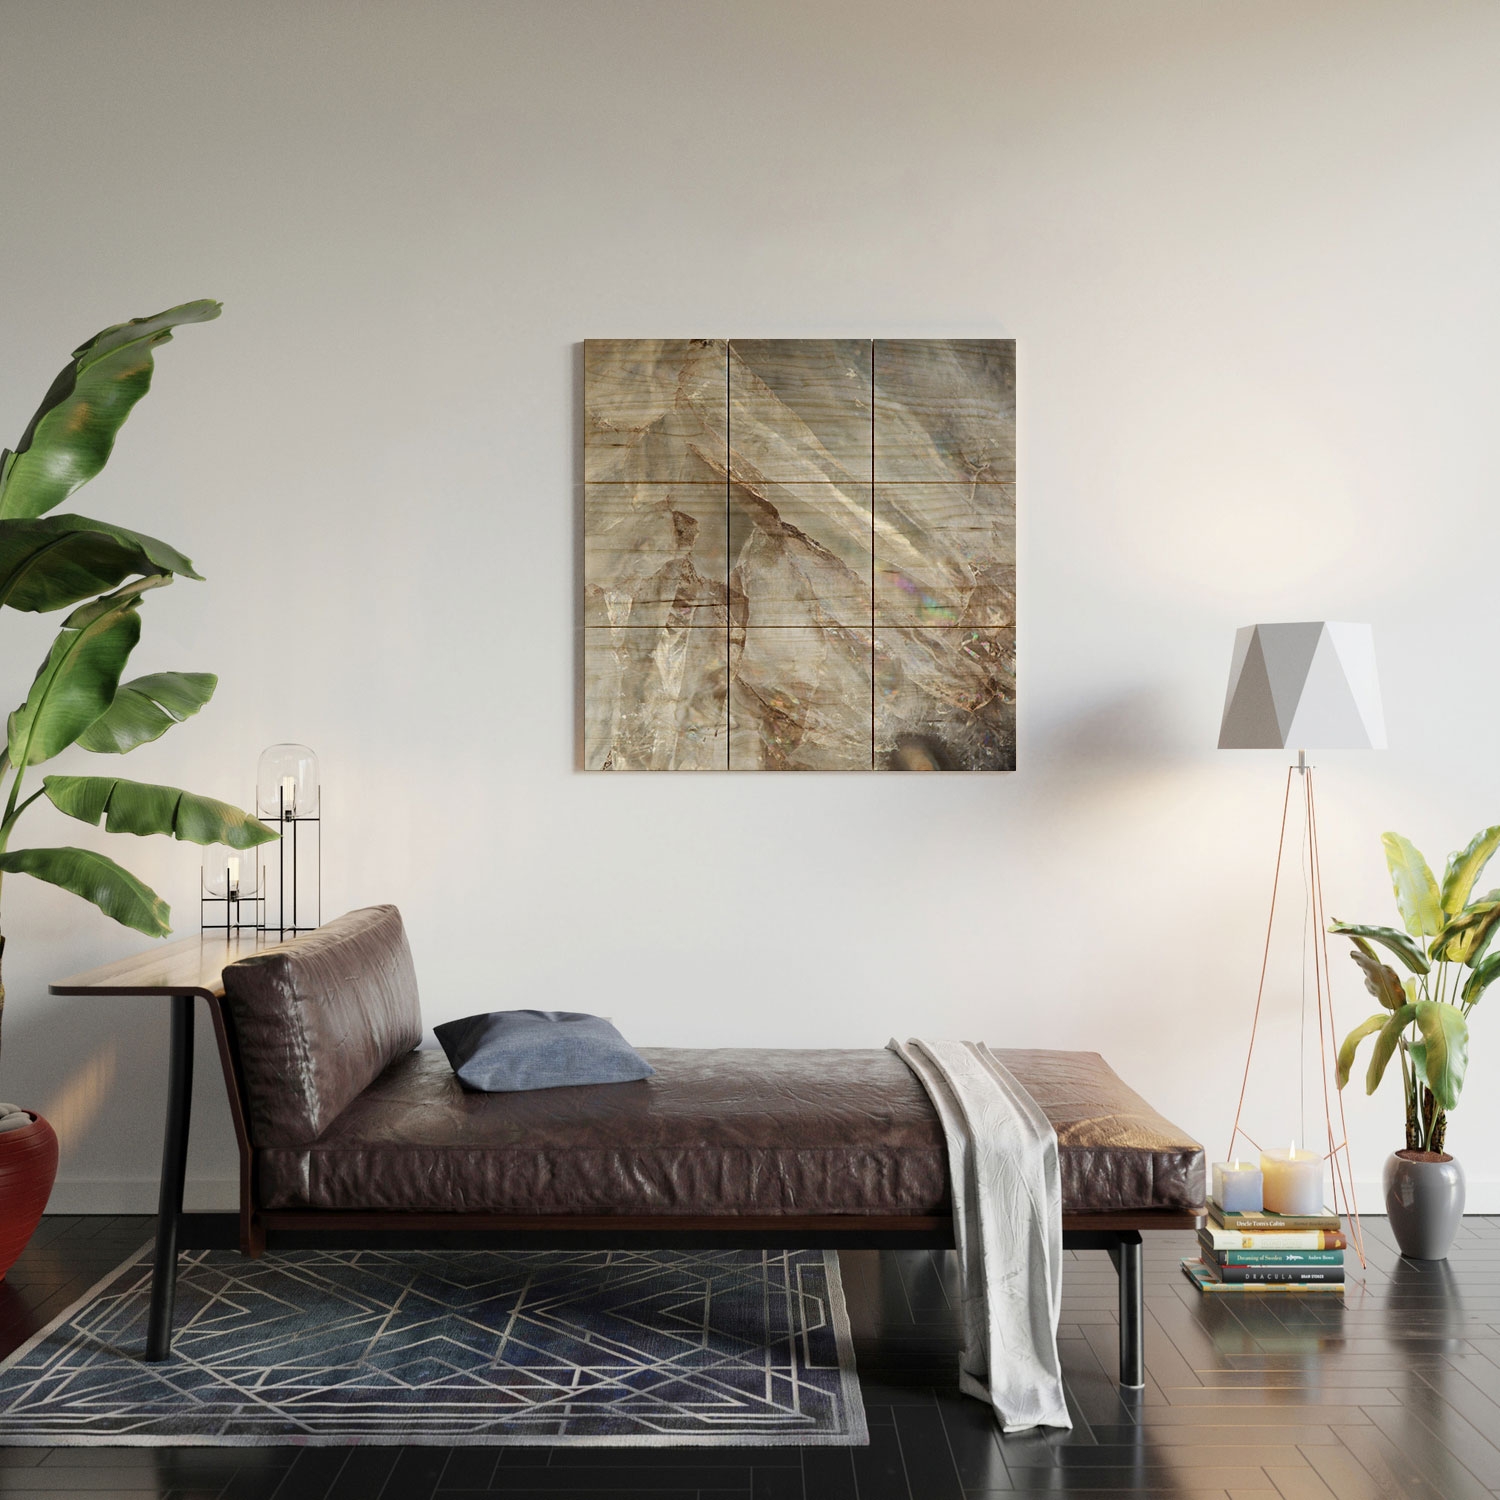 Crystalize by Bree Madden - Wood Wall Mural3' X 3' (Nine 12" Wood Squares) - Image 3